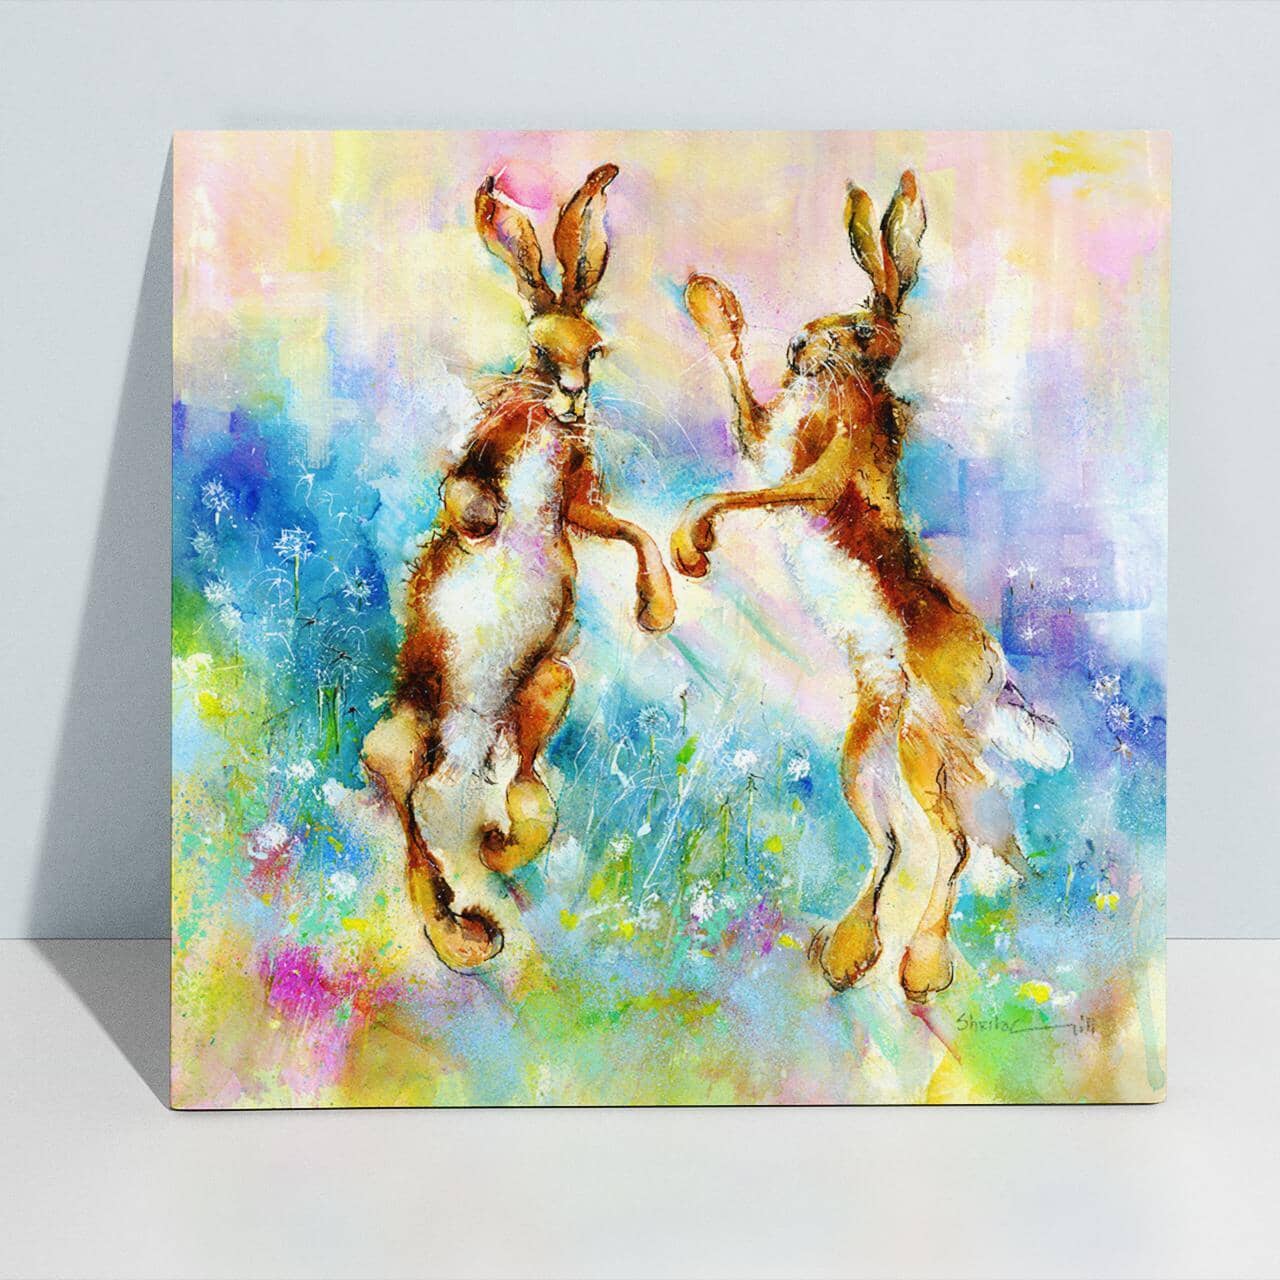 Boxing Brown Hares Canvas Art Print designed by artist Sheila Gill
